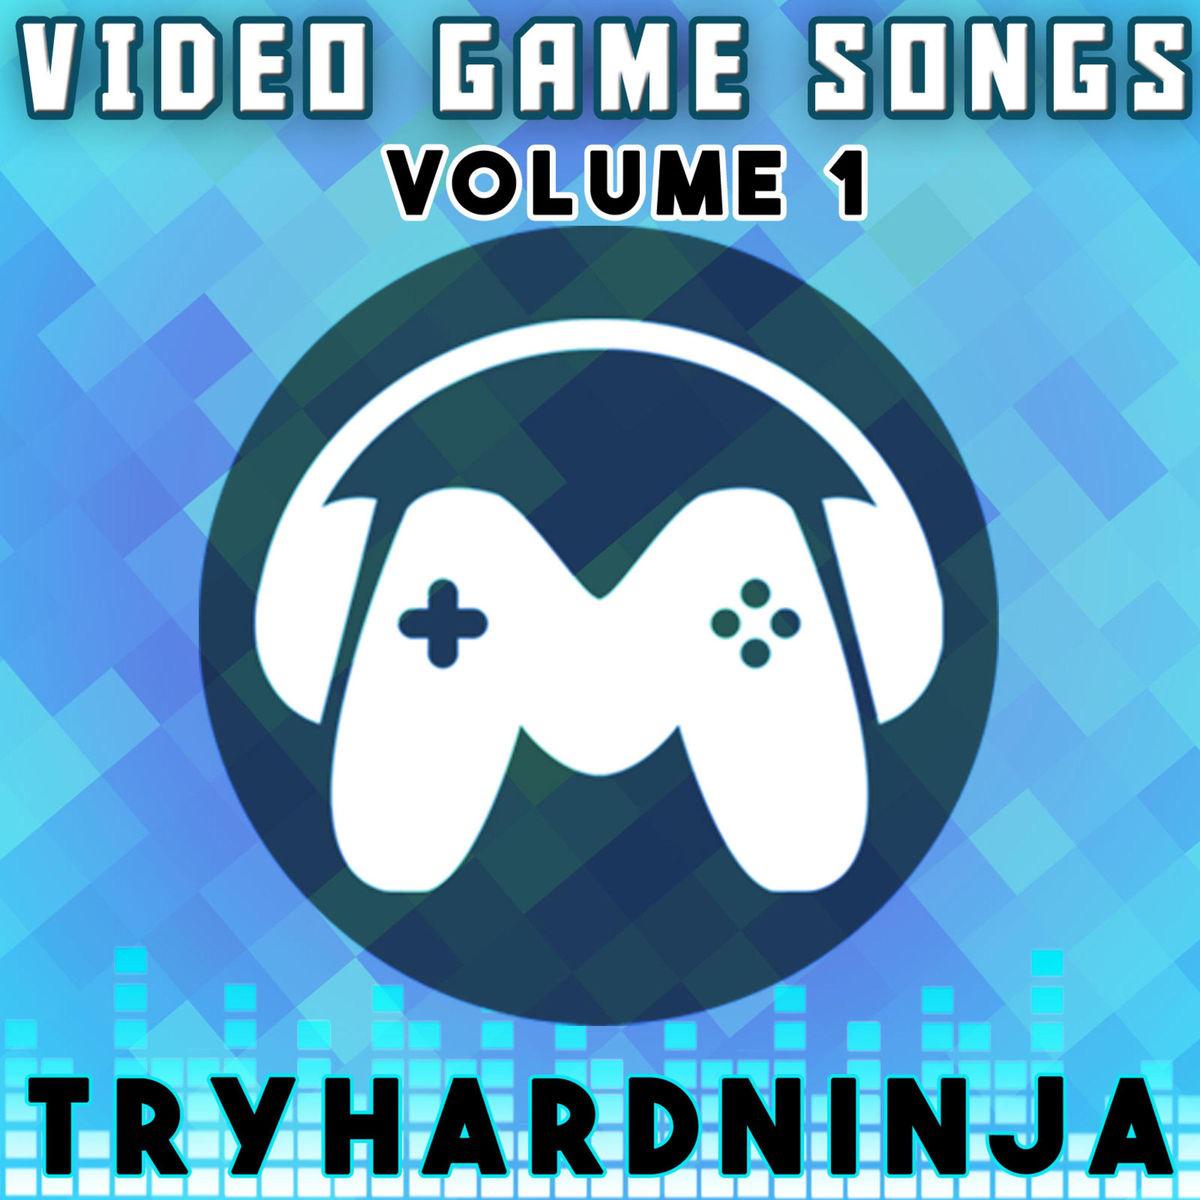 The Puppet Song歌词 歌手TryHardNinja-专辑Video Game Songs, Vol. 1-单曲《The Puppet Song》LRC歌词下载